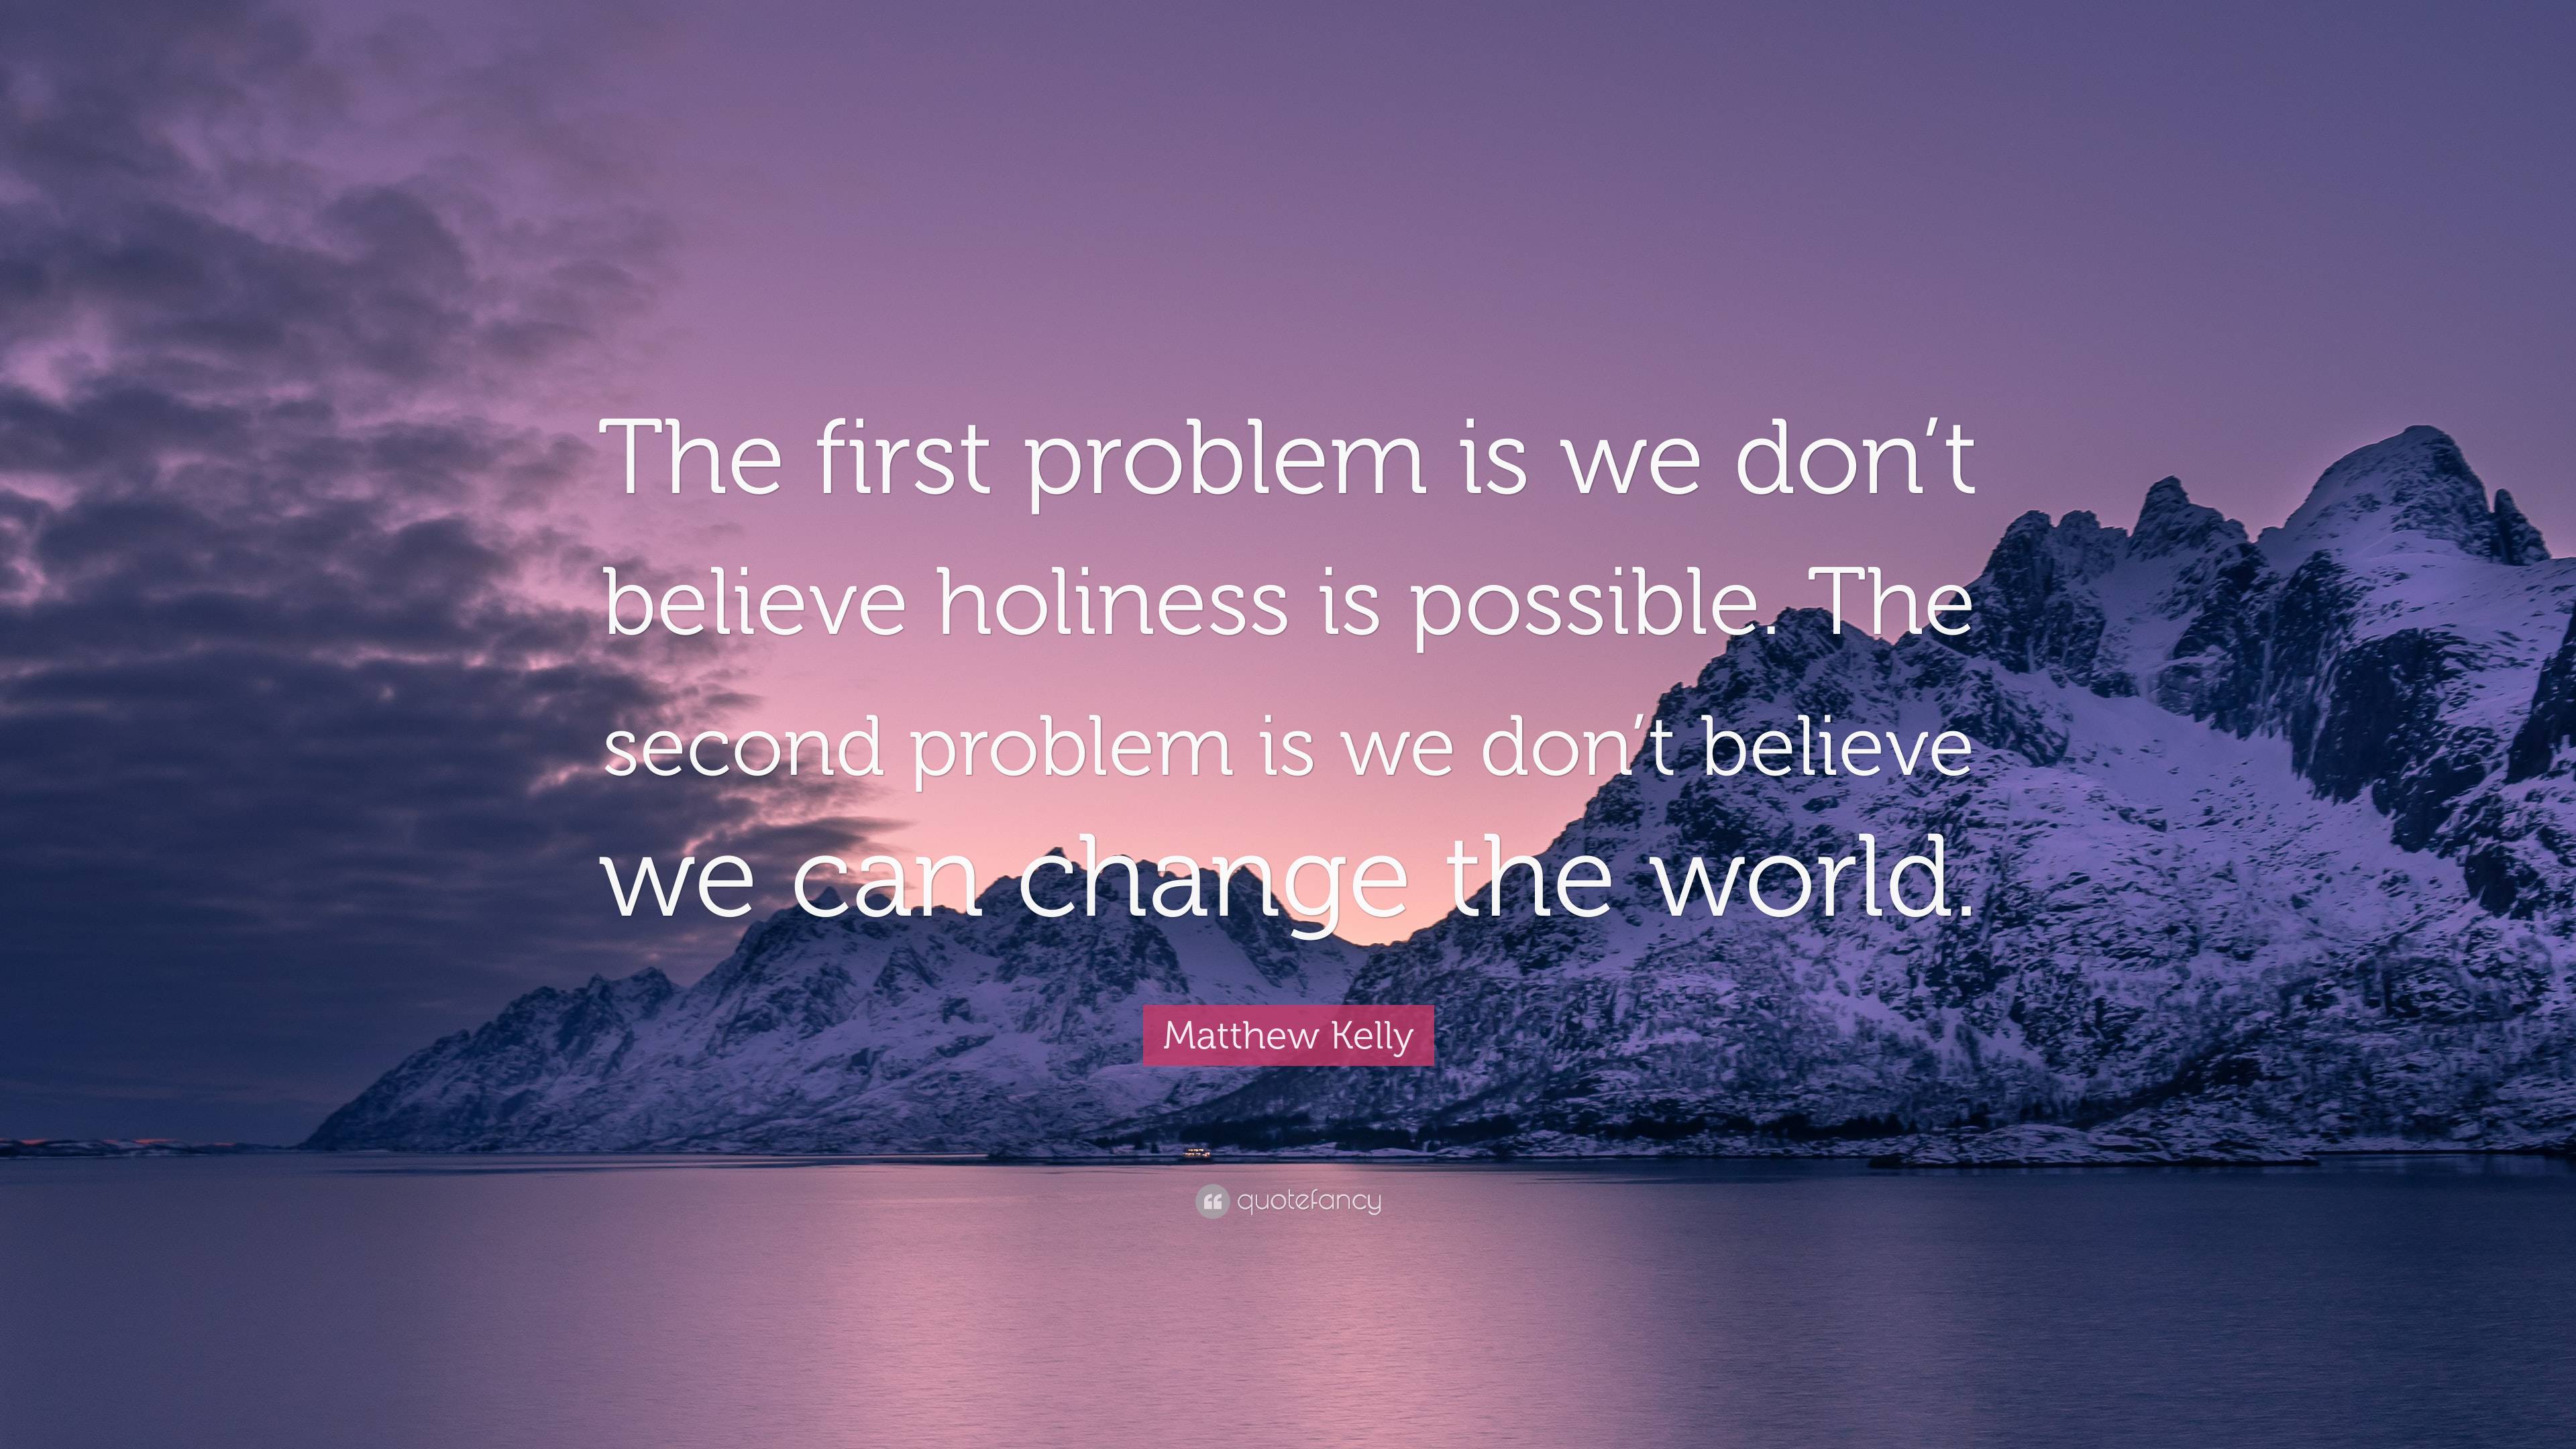 Matthew Kelly Quote: “The first problem is we don’t believe holiness is ...